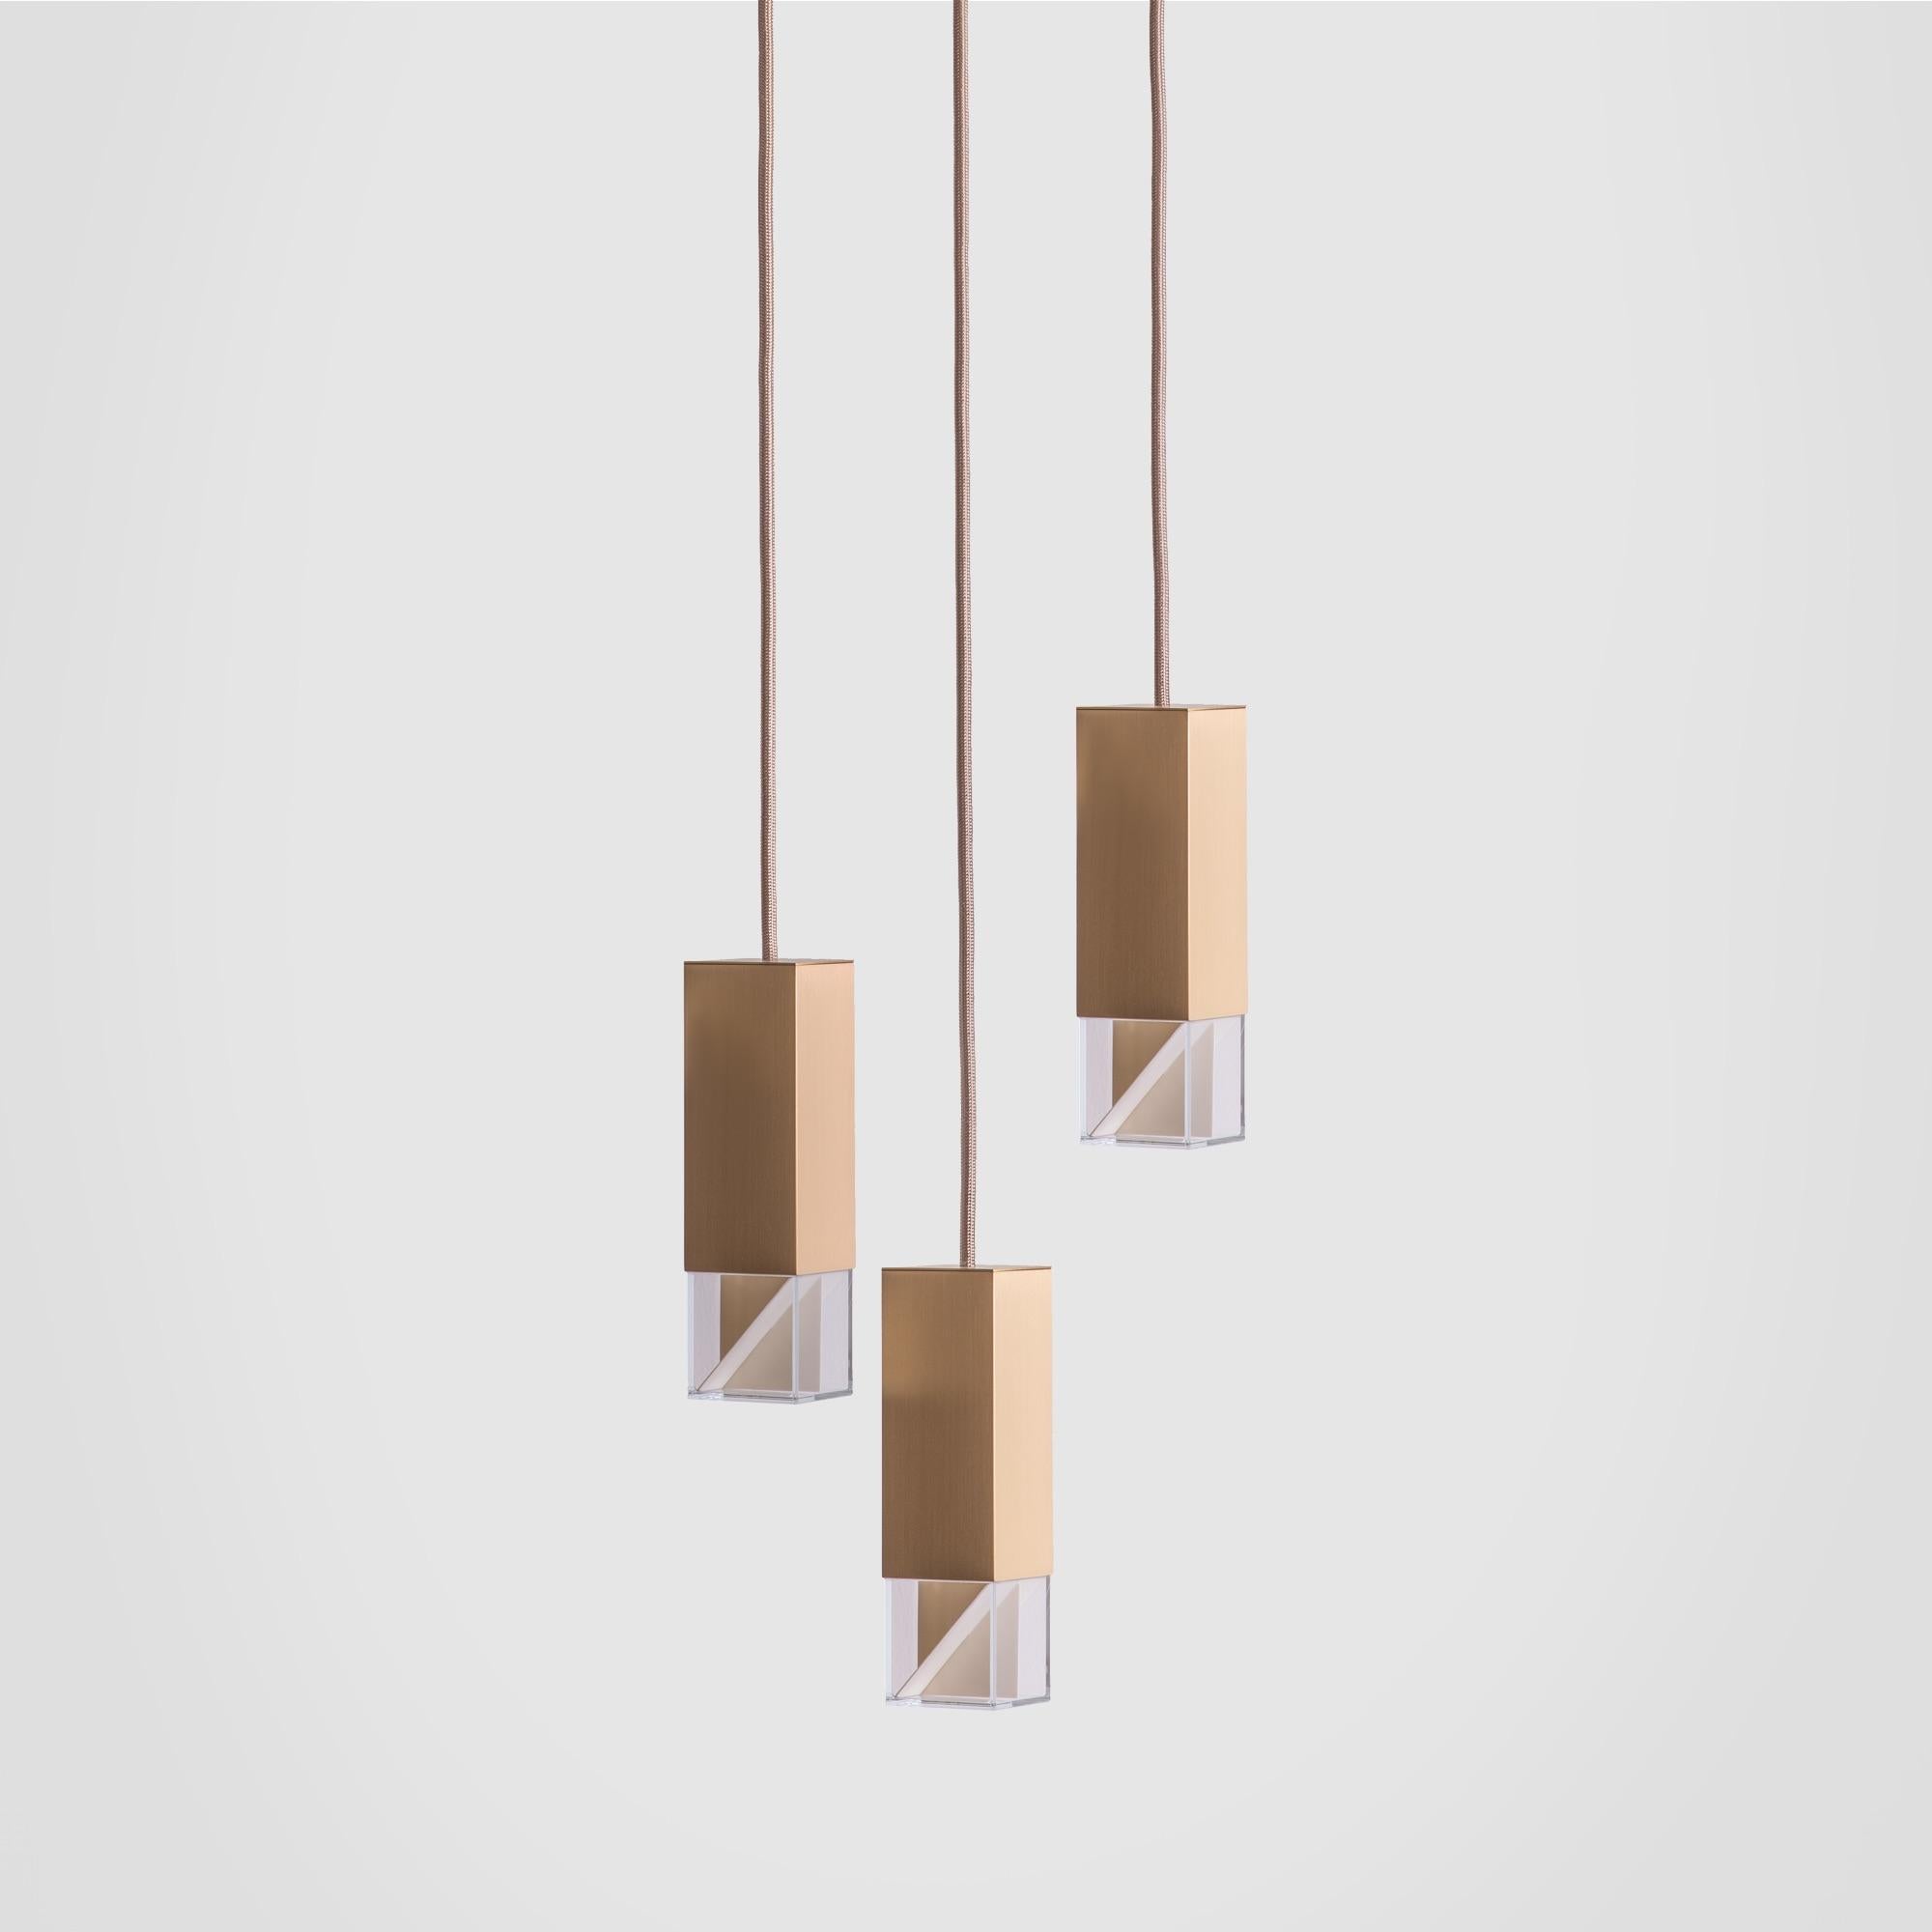 About
Contemporary Golden Brass Trio Chandelier by Formaminima

Lamp/One Brass Trio Chandelier from Chandeliers Series
Design by Formaminima
Chandelier
Materials:
Body lamp handcrafted in solid brass golden finish / crystal glass diffuser hosting